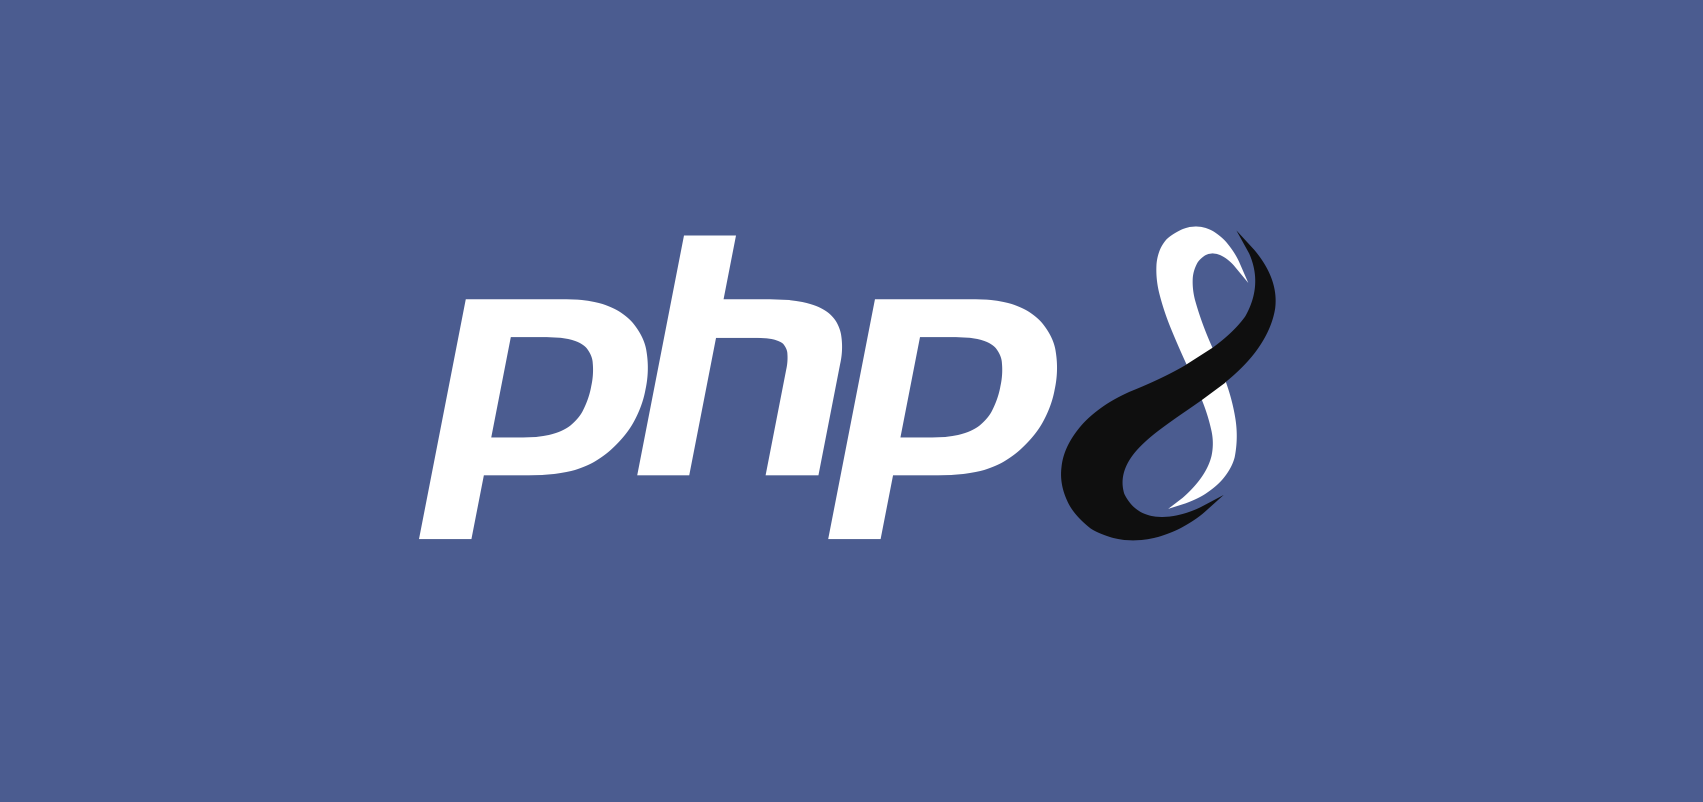 Php term